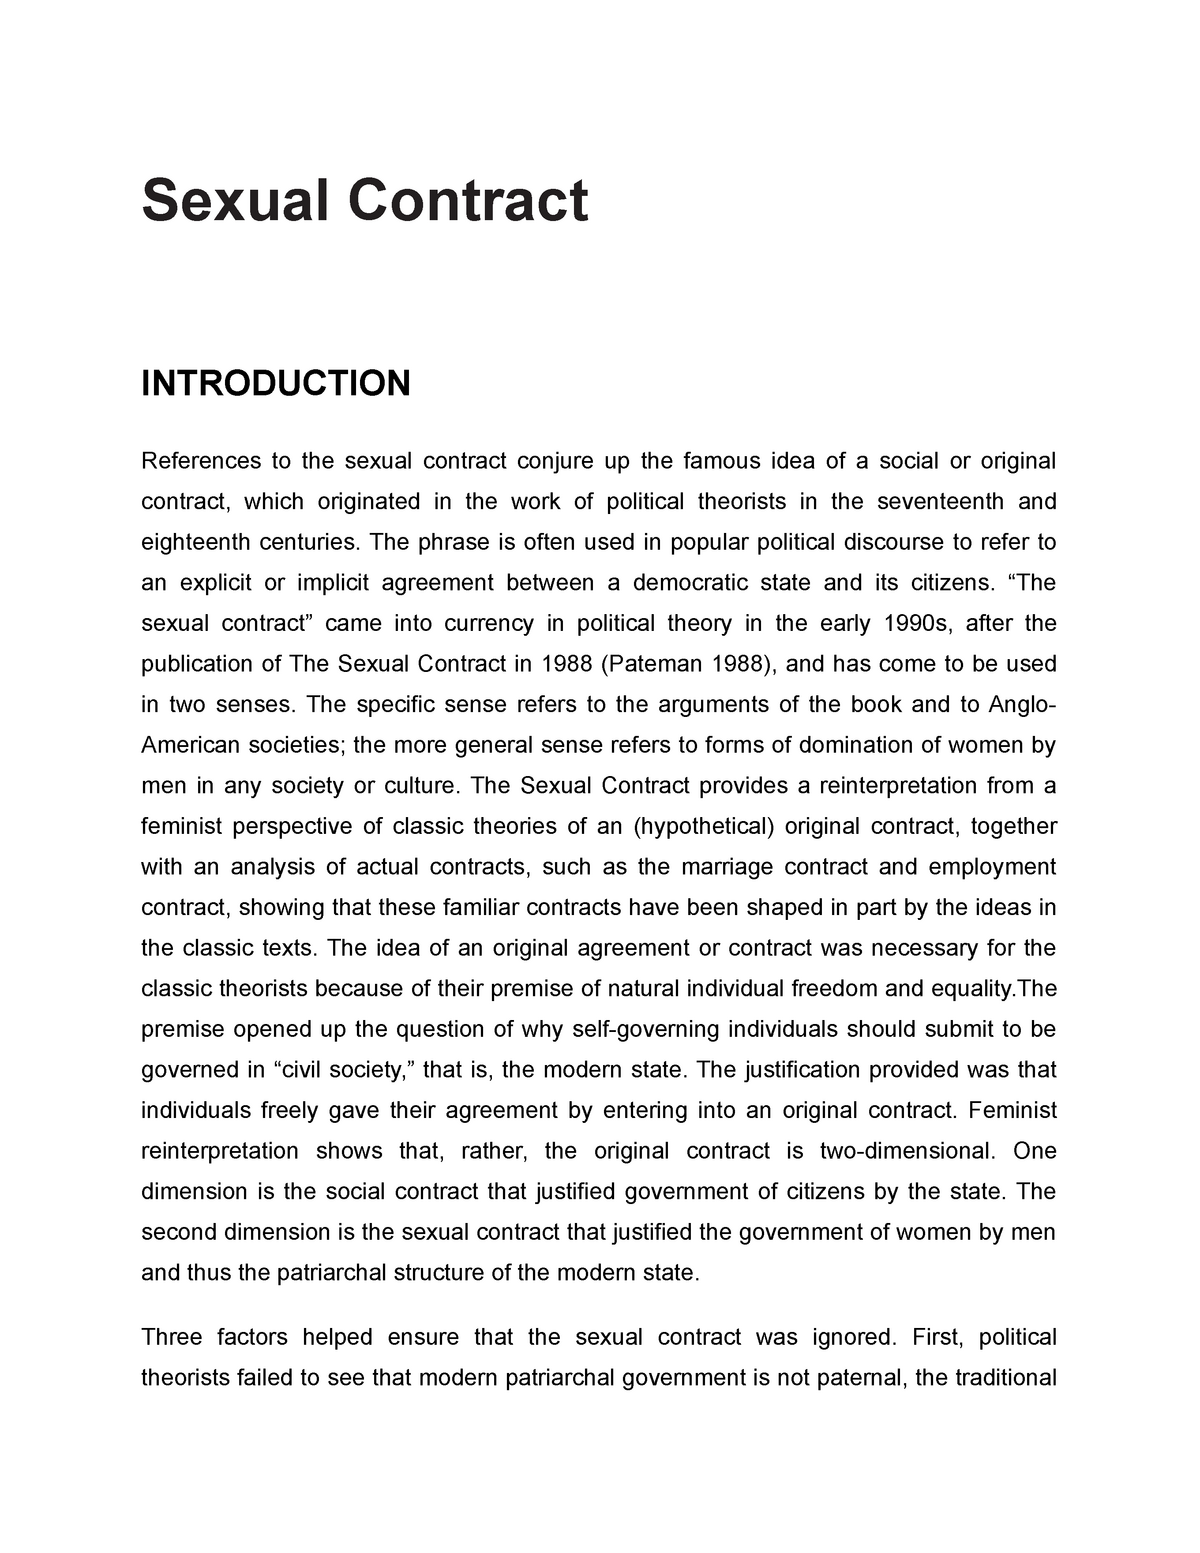 A Brief On Sexual Contract Sexual Contract Introduction References To The Sexual Contract